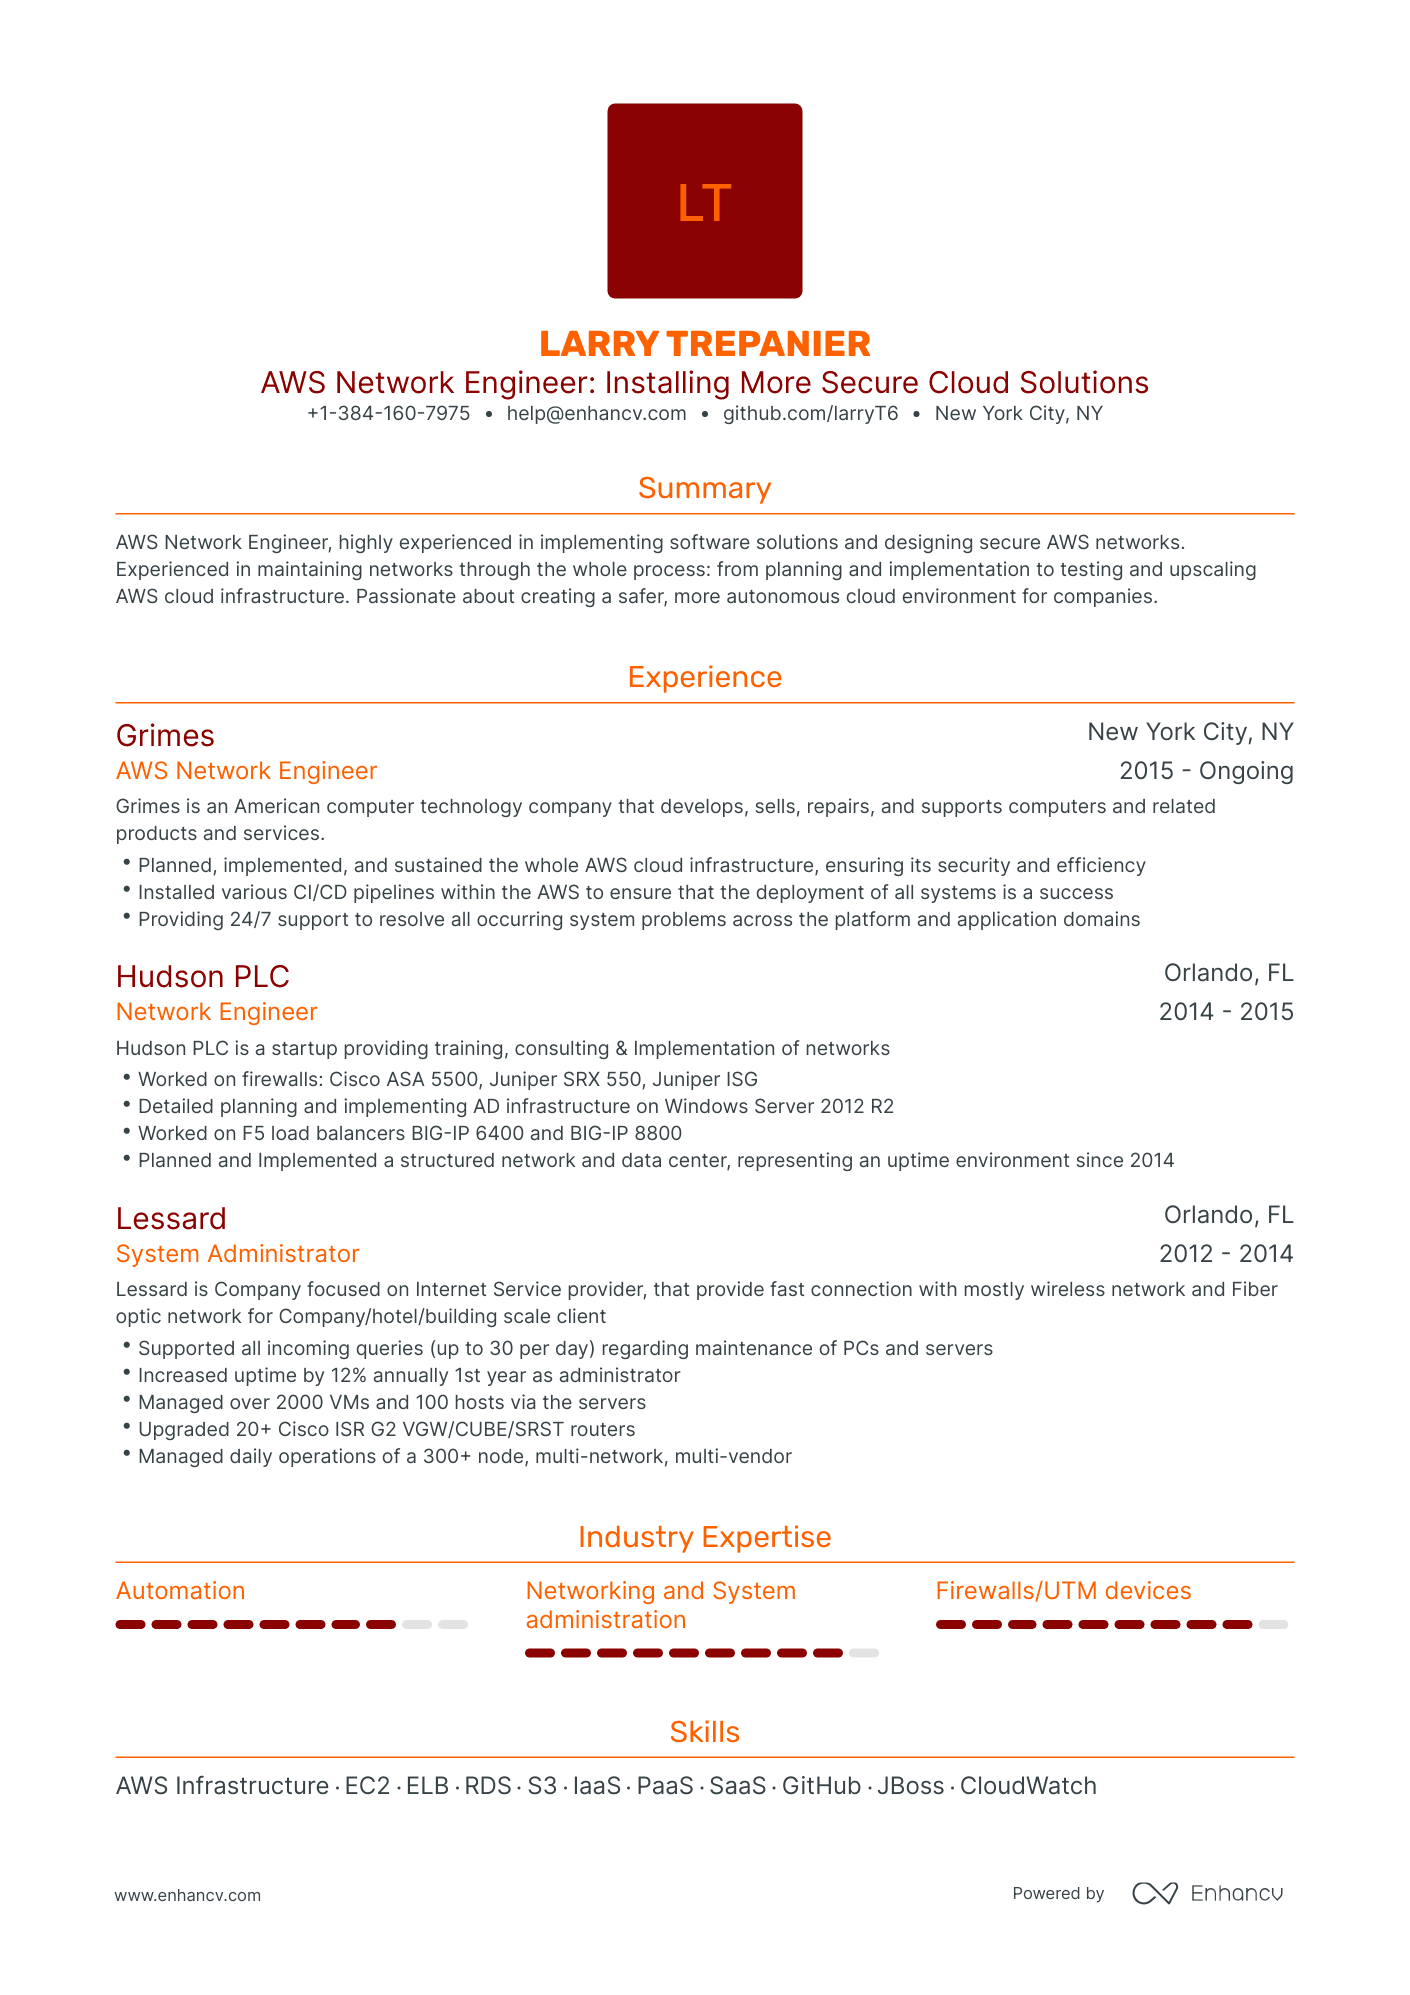 Traditional AWS Network Engineer Resume Template